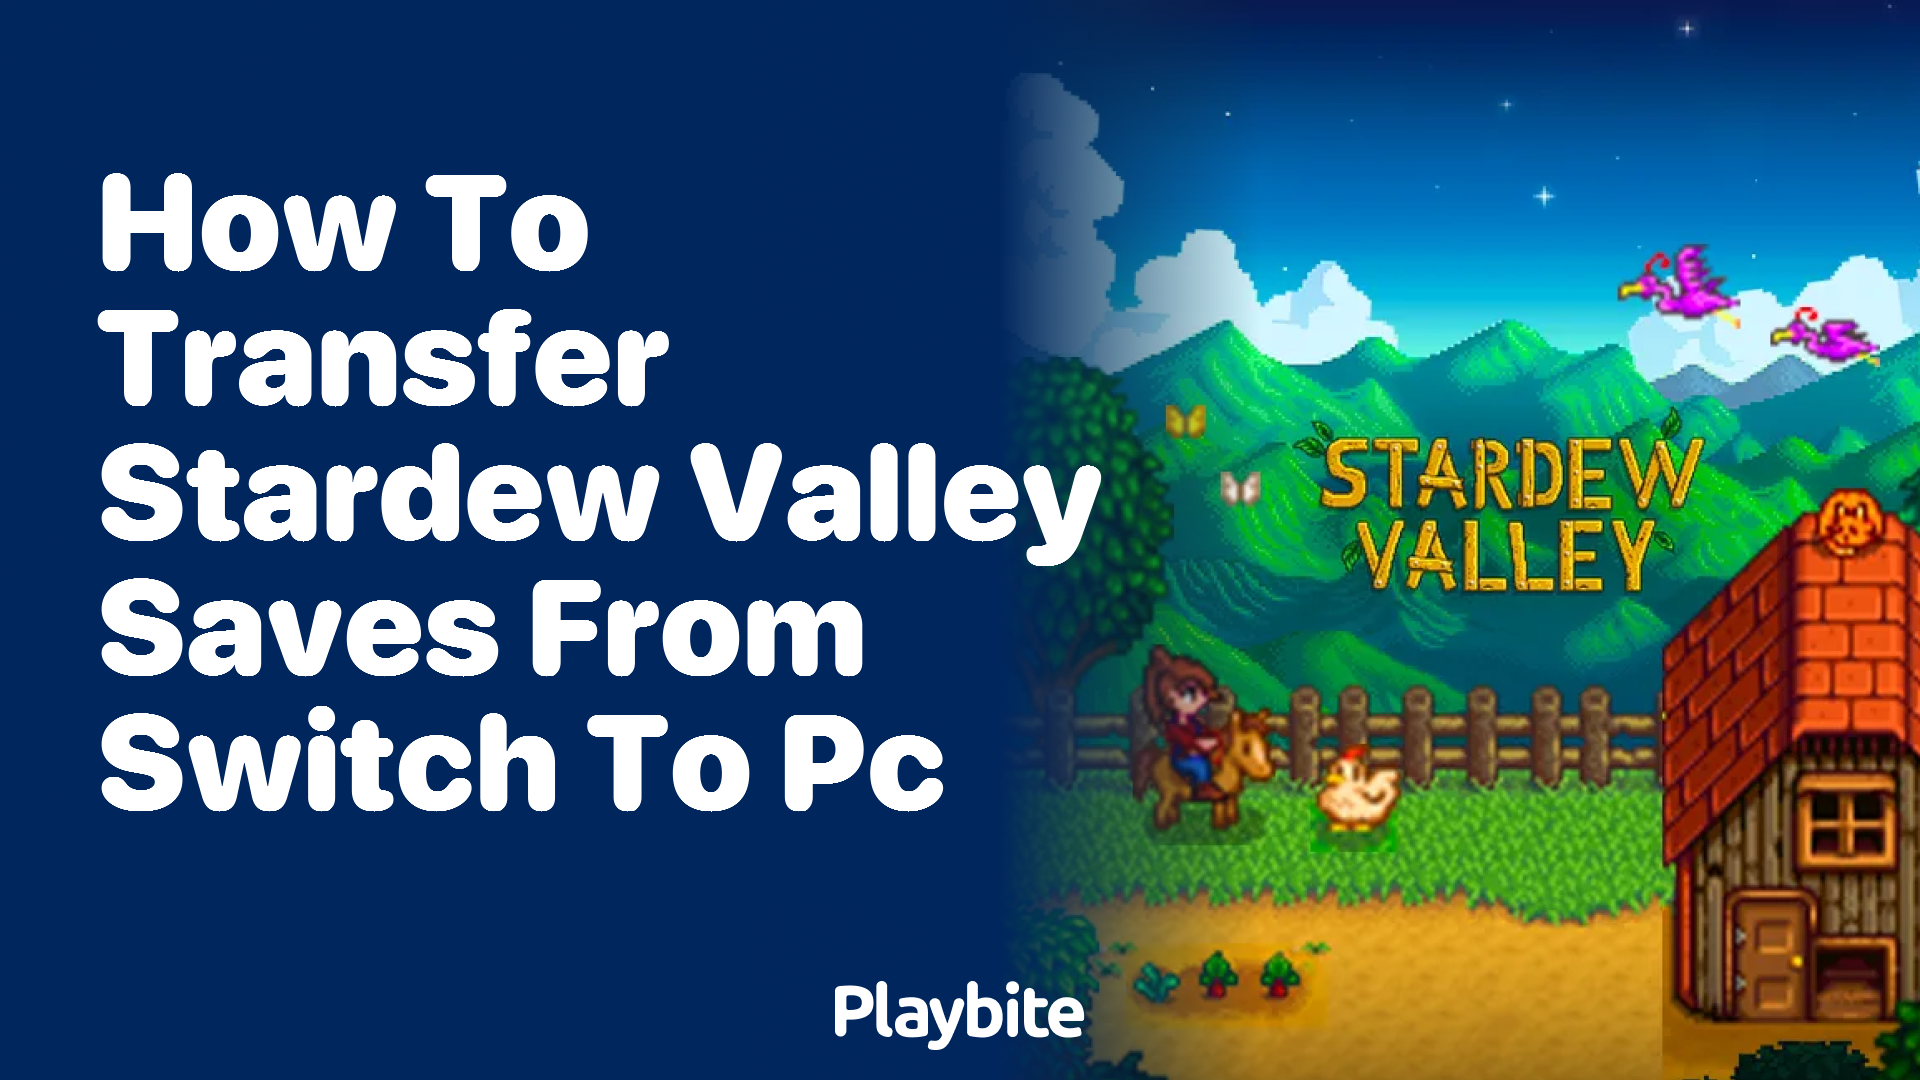 How to transfer Stardew Valley saves from Switch to PC